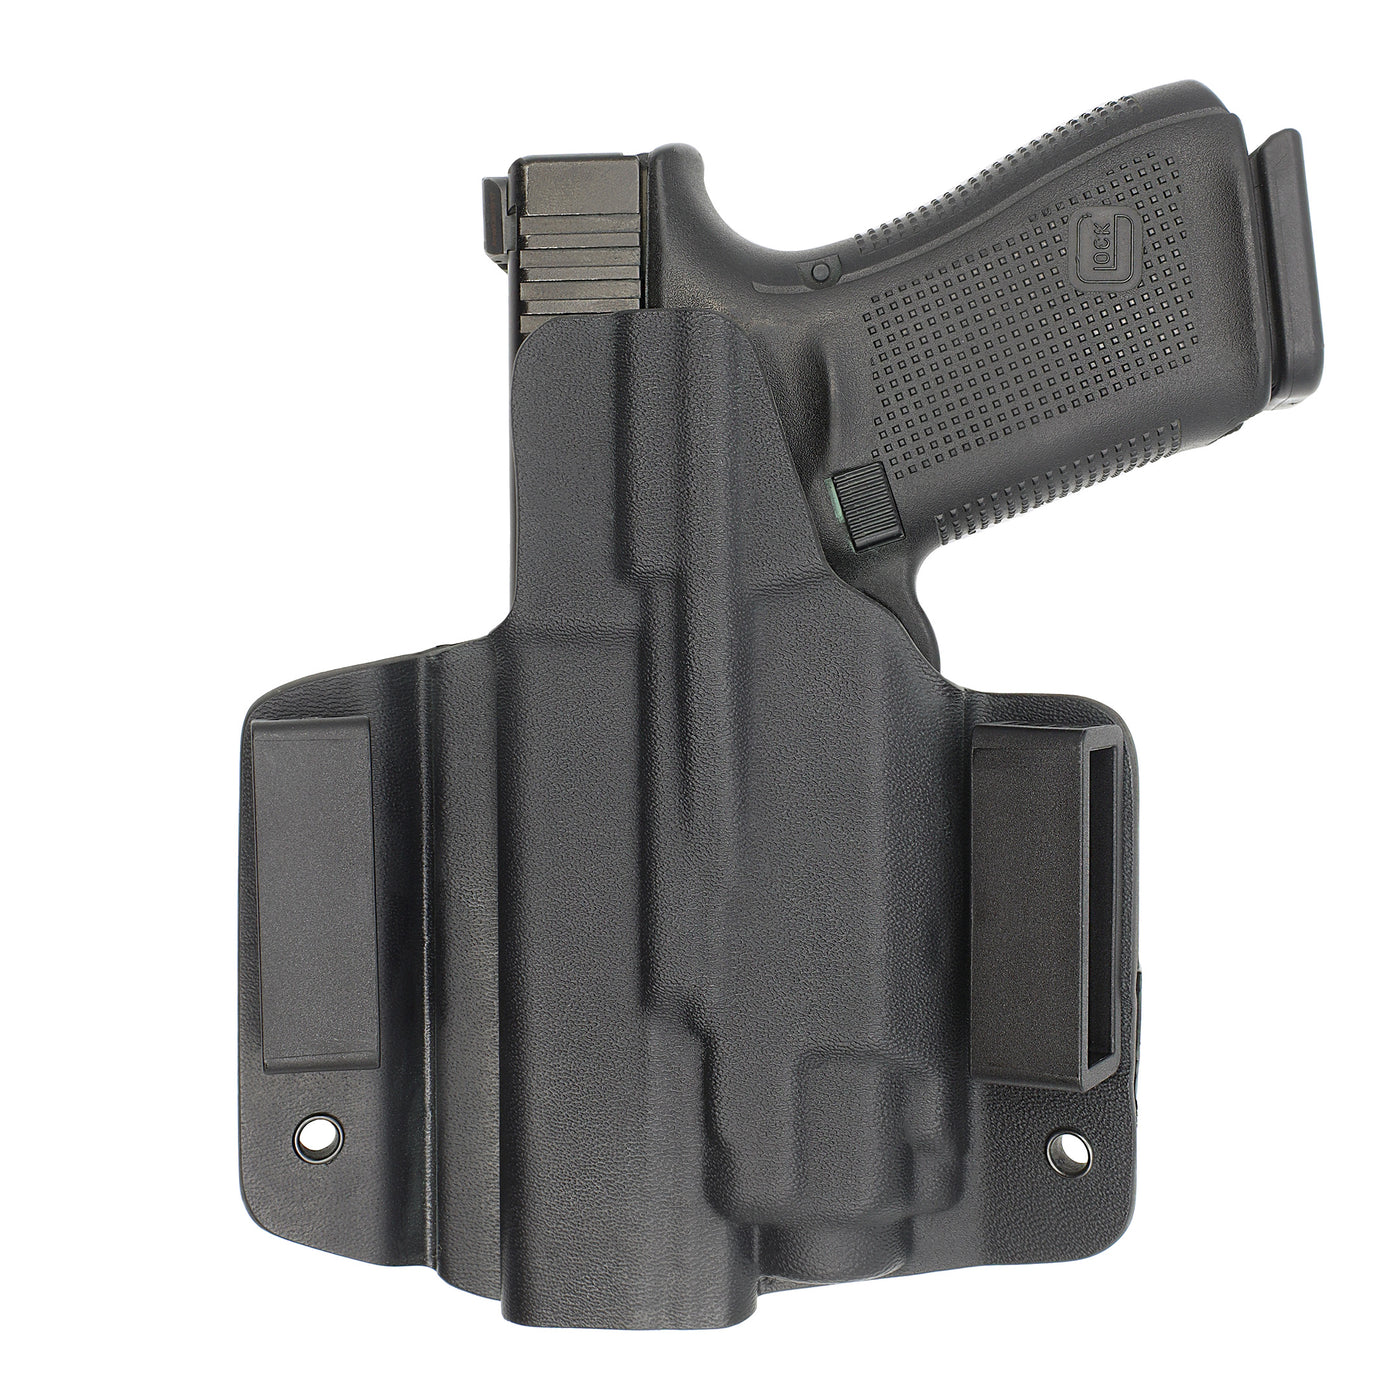 C&G Holsters custom OWB tactical Glock 29/30 streamlight TLR8 holstered back view